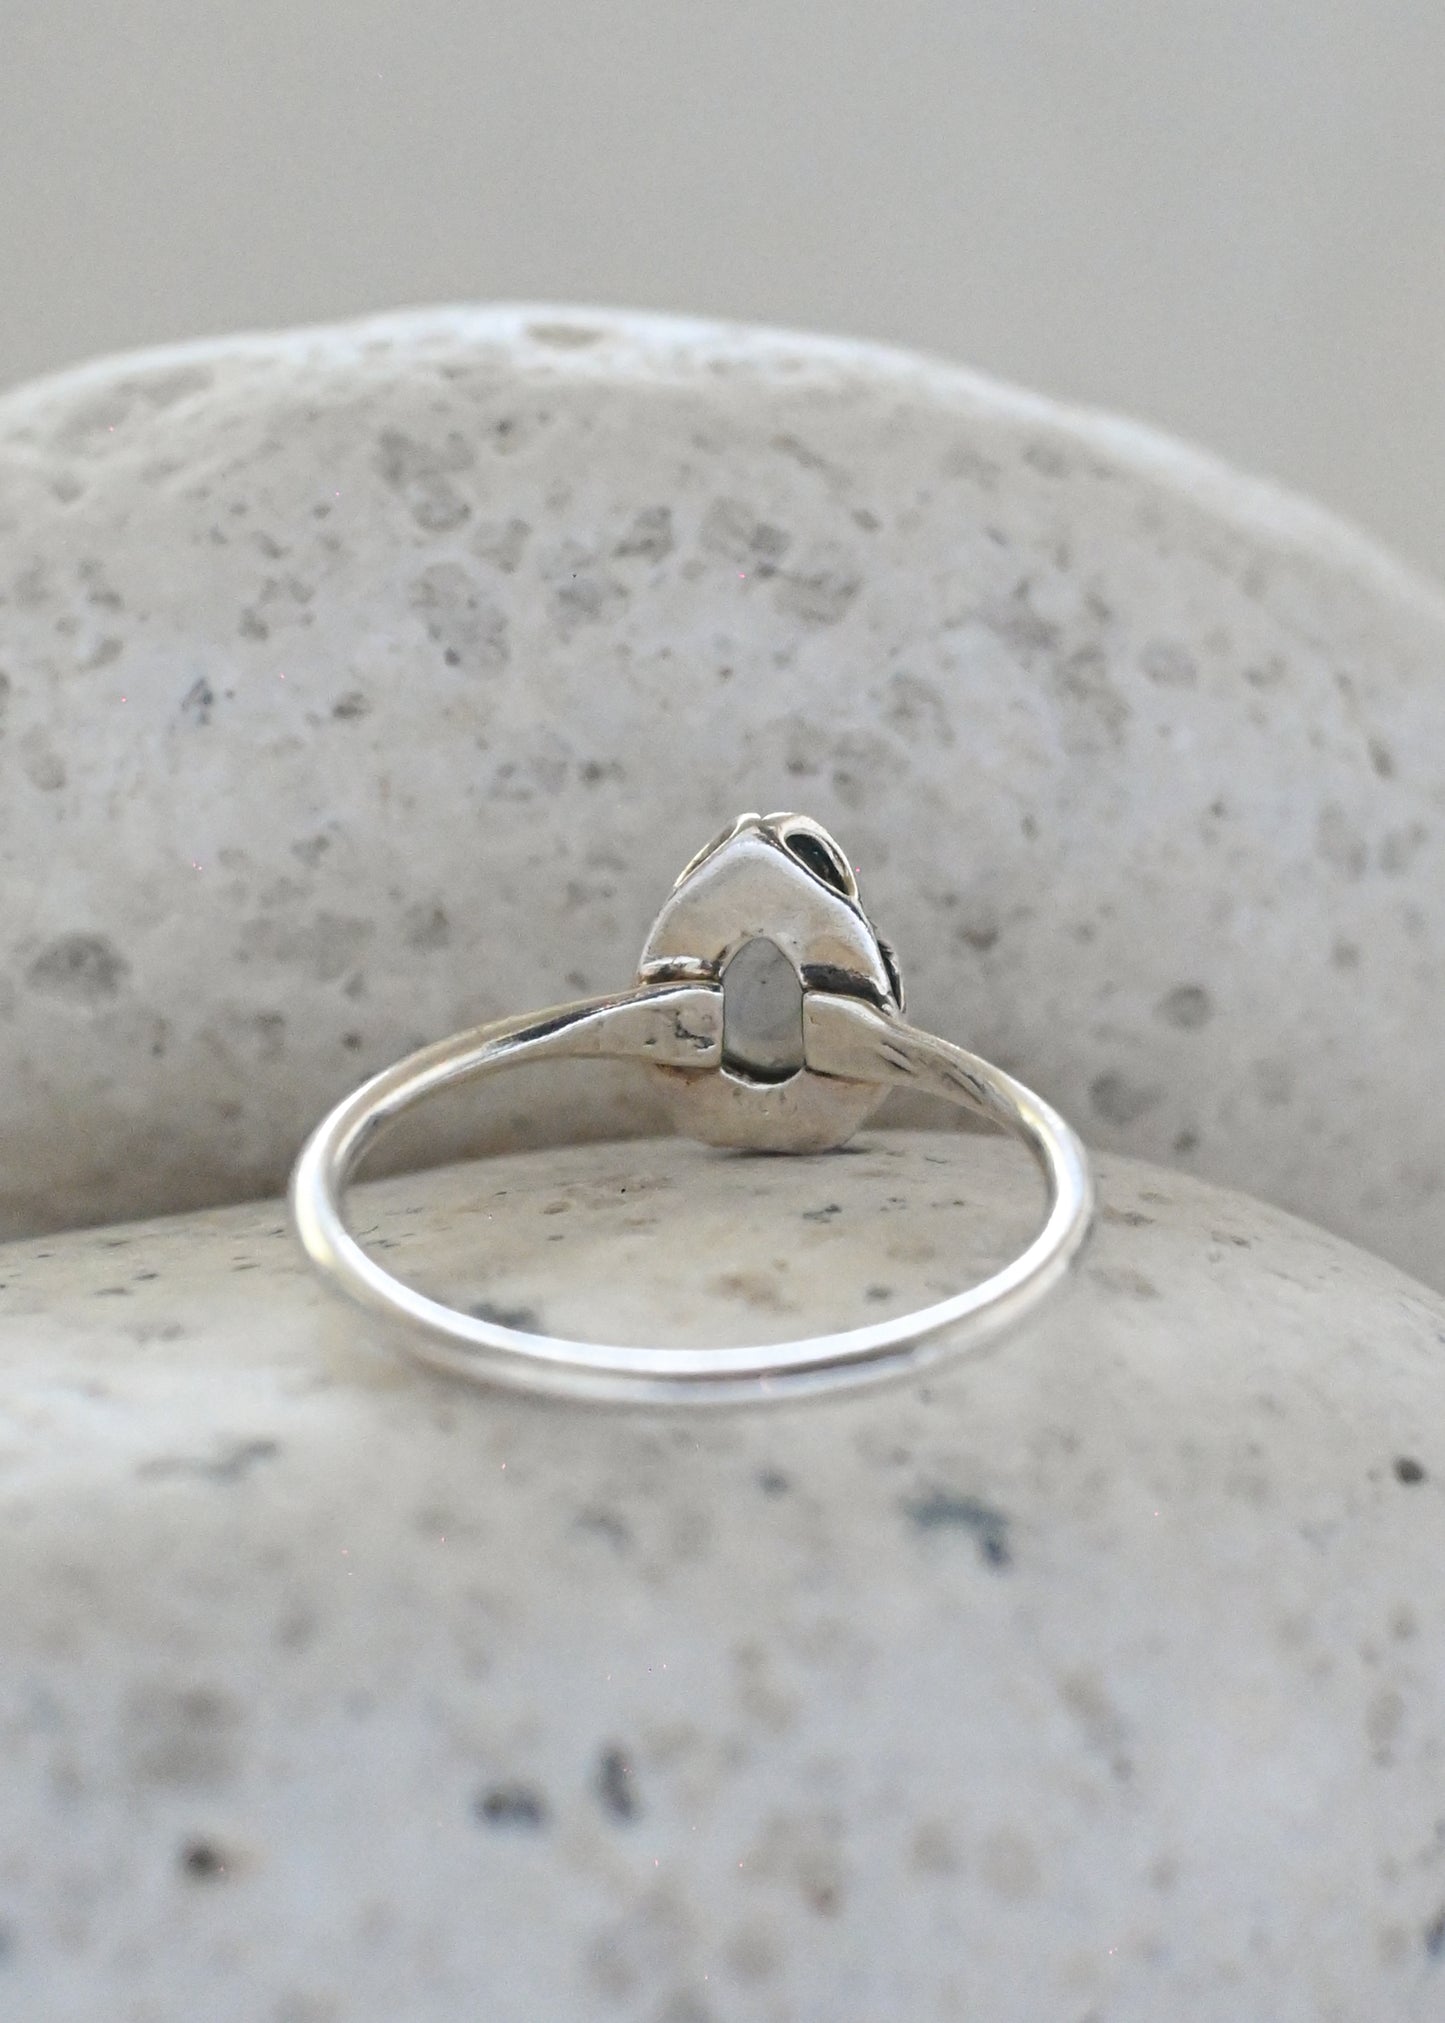 Moonstone Solitaire Ring - 16号